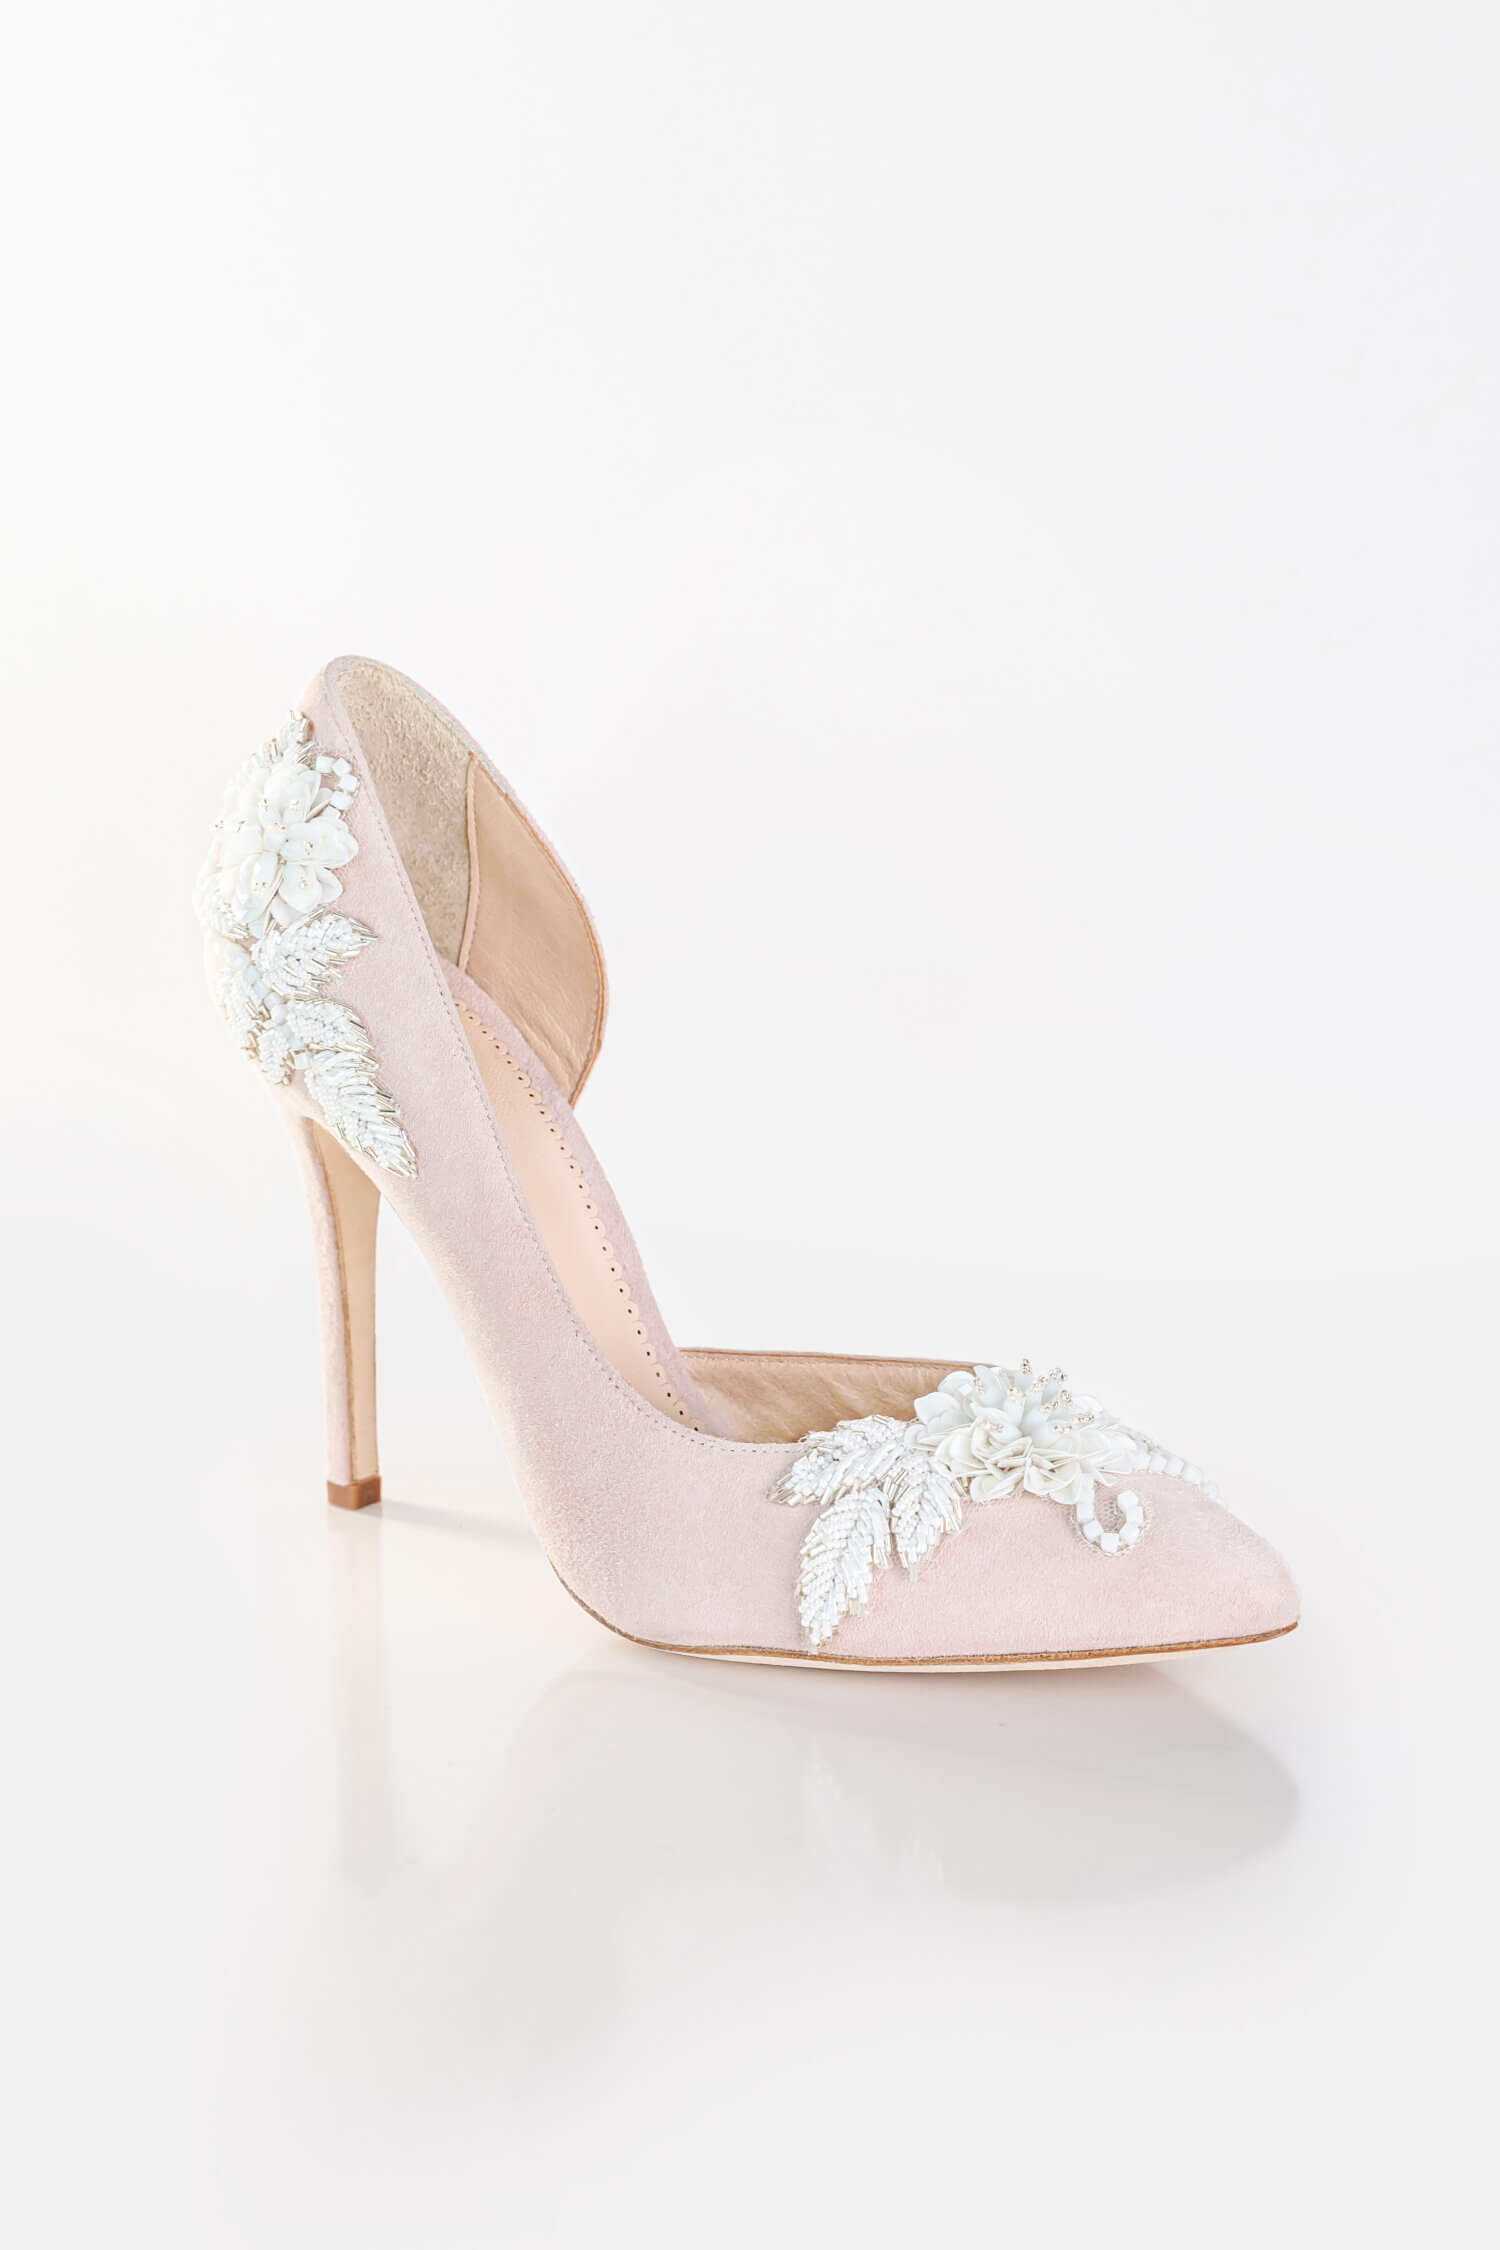 Marry Me embellished bridal heels. Wedding shoes handmade by Di Hassall.